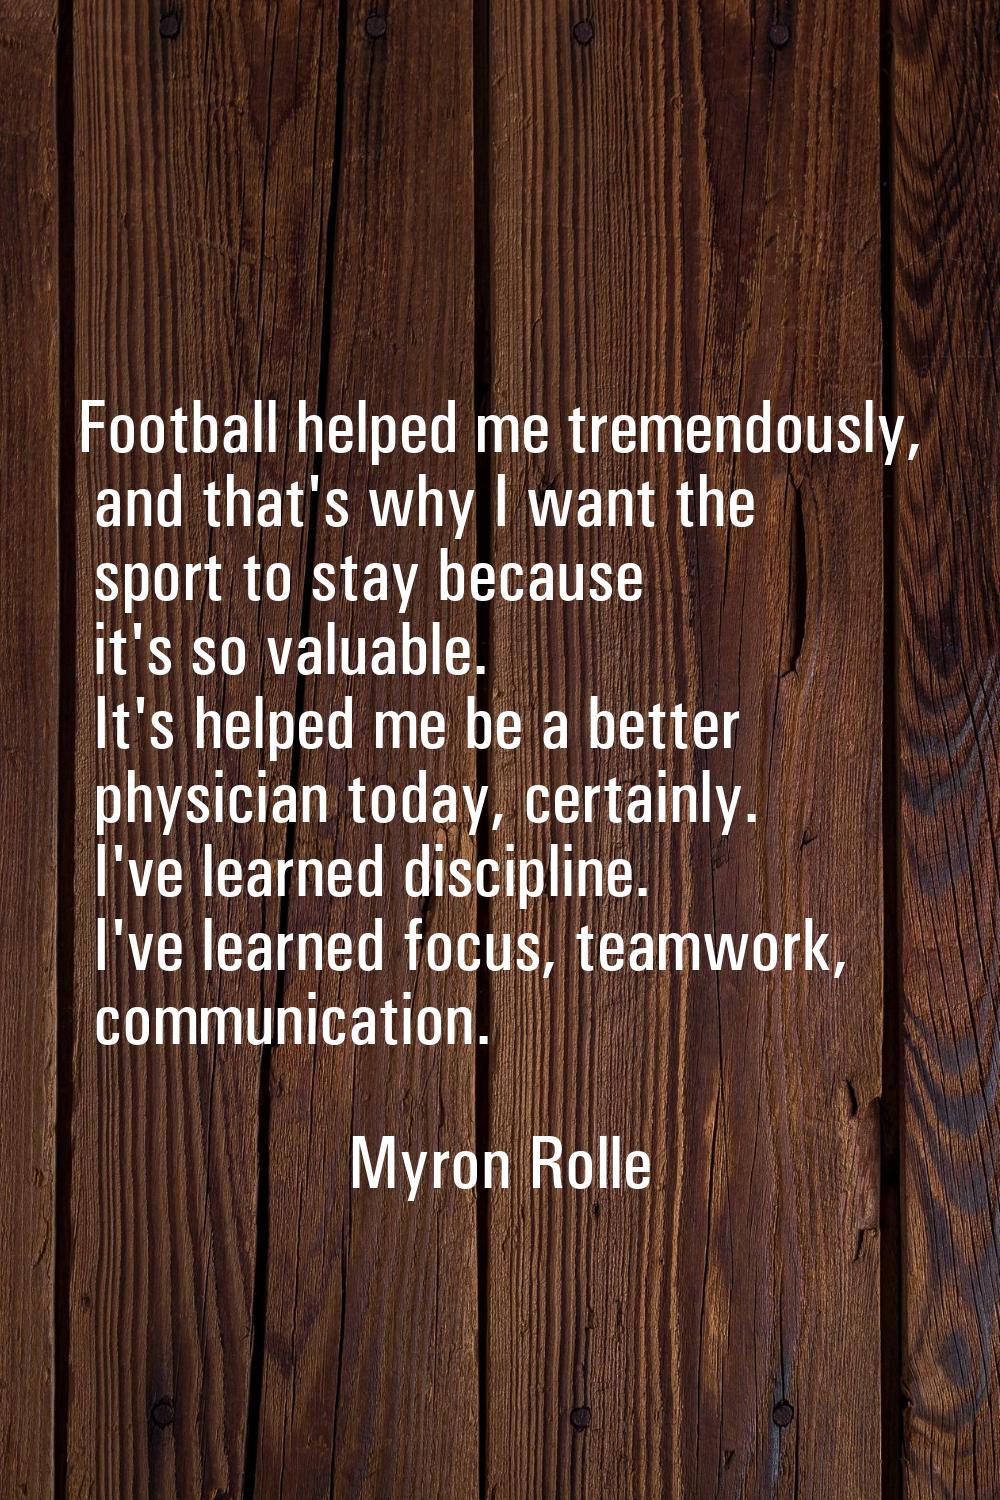 Football helped me tremendously, and that's why I want the sport to stay because it's so valuable. 